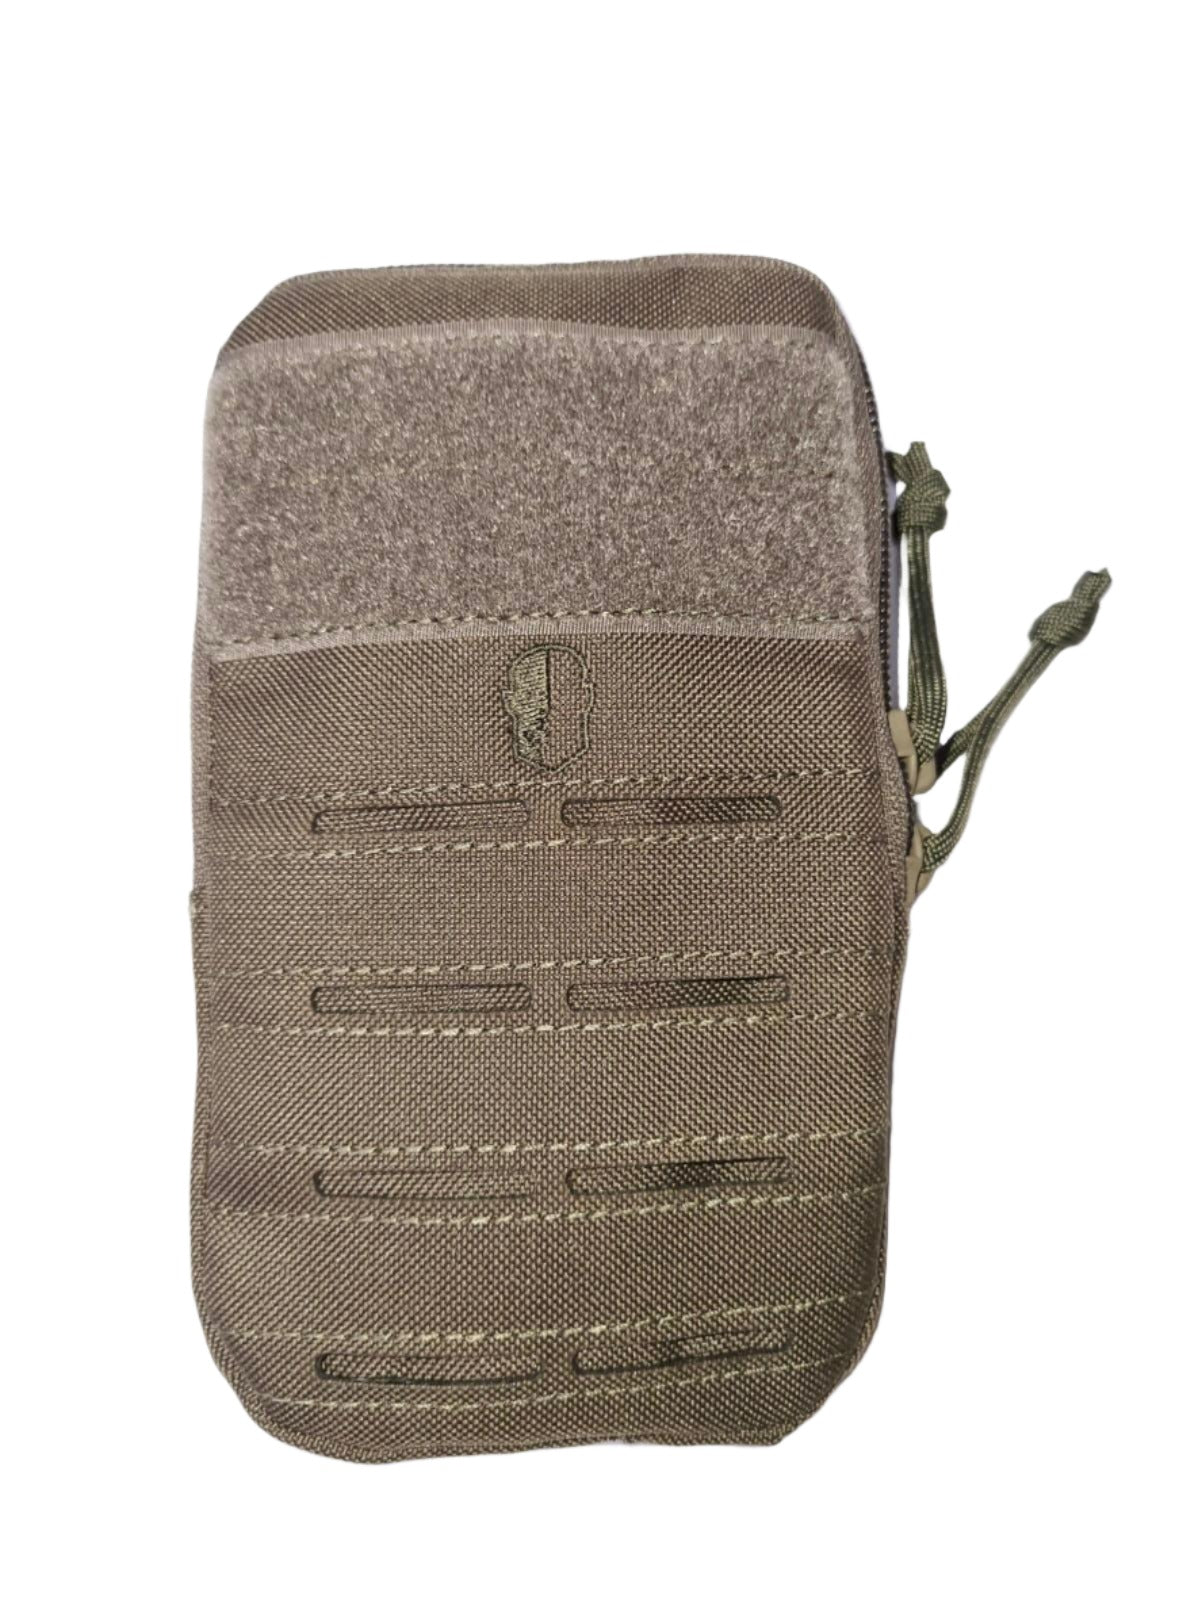 SHS-1038-Cell Phone Pouch with Molle loop-RANGER GREEN